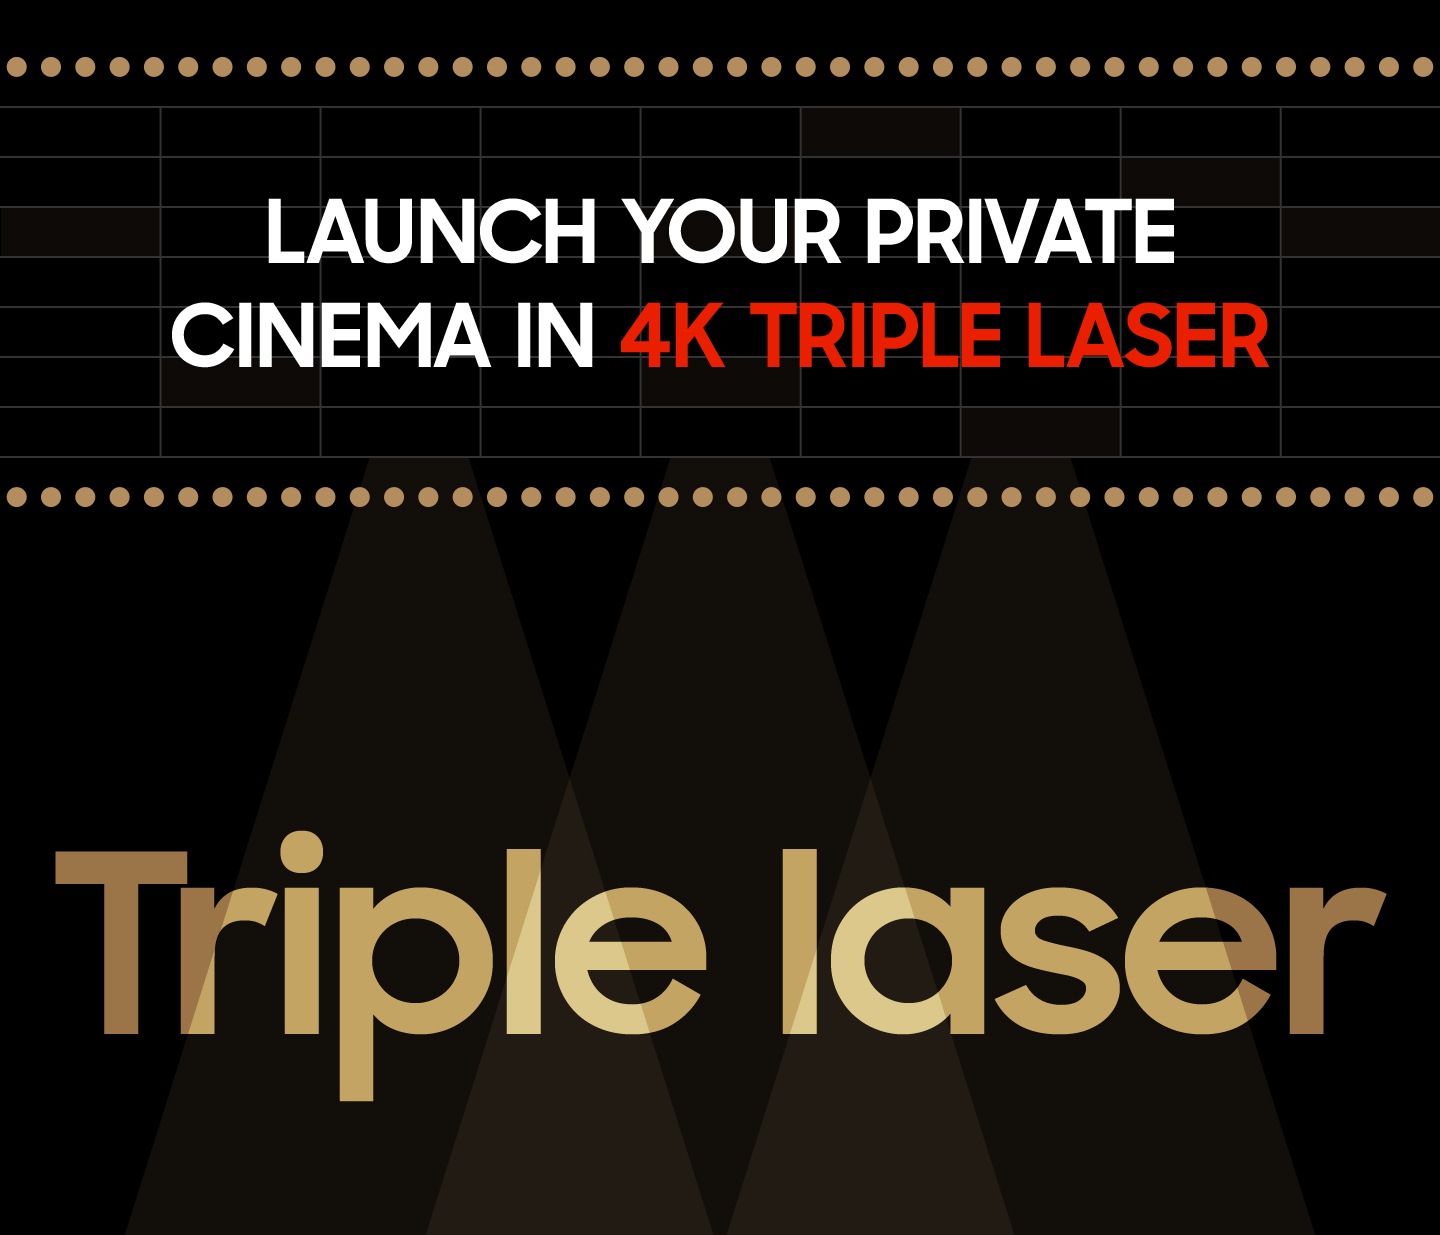 Launch your private cinema